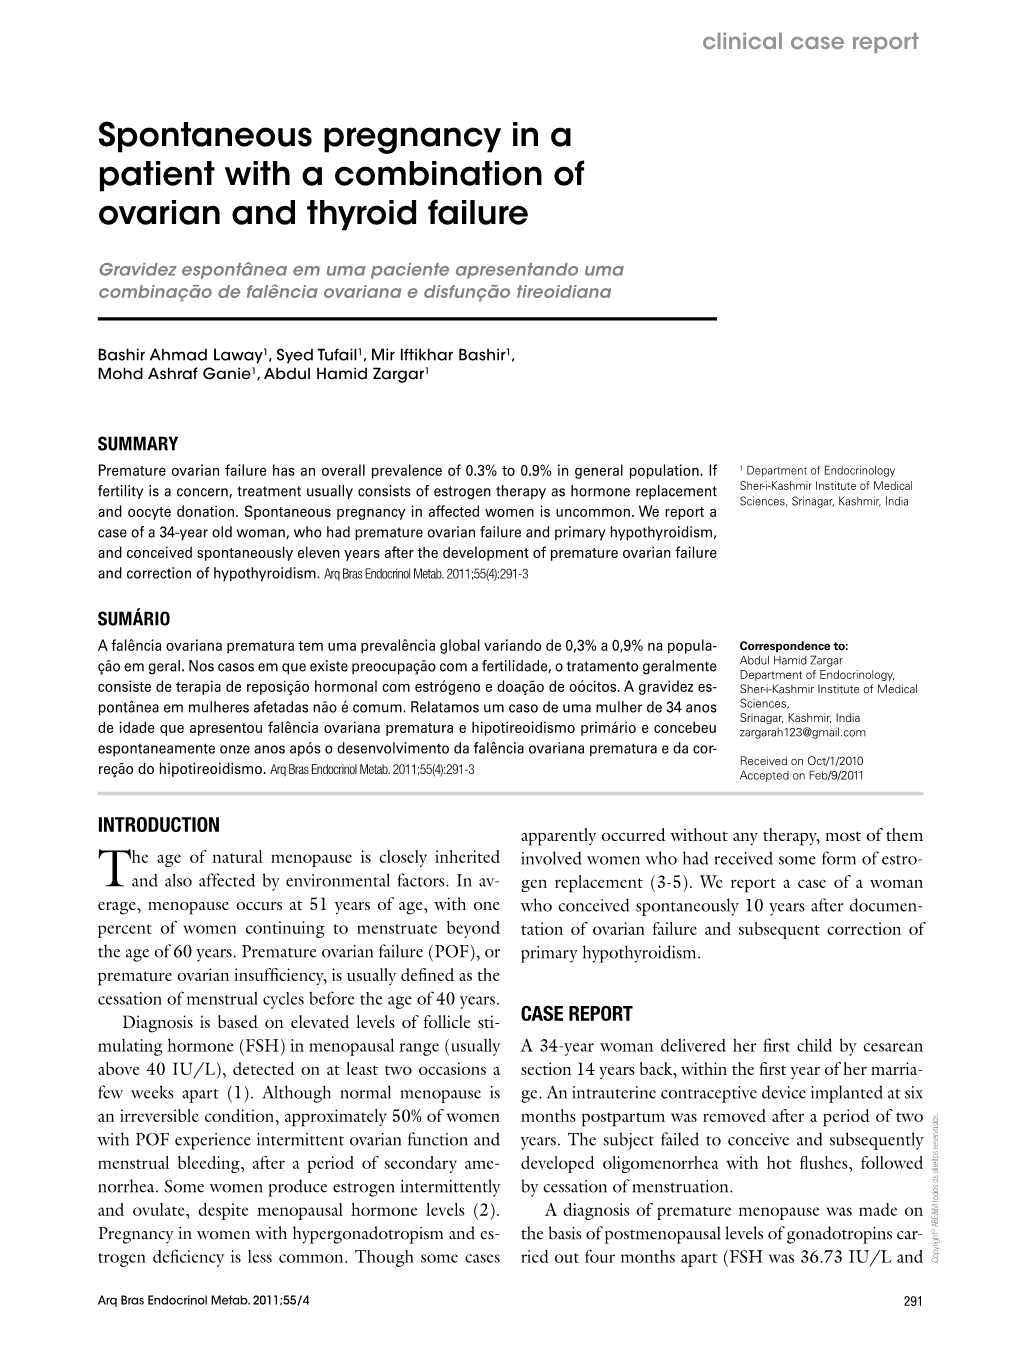 Spontaneous Pregnancy in a Patient with a Combination of Ovarian and Thyroid Failure